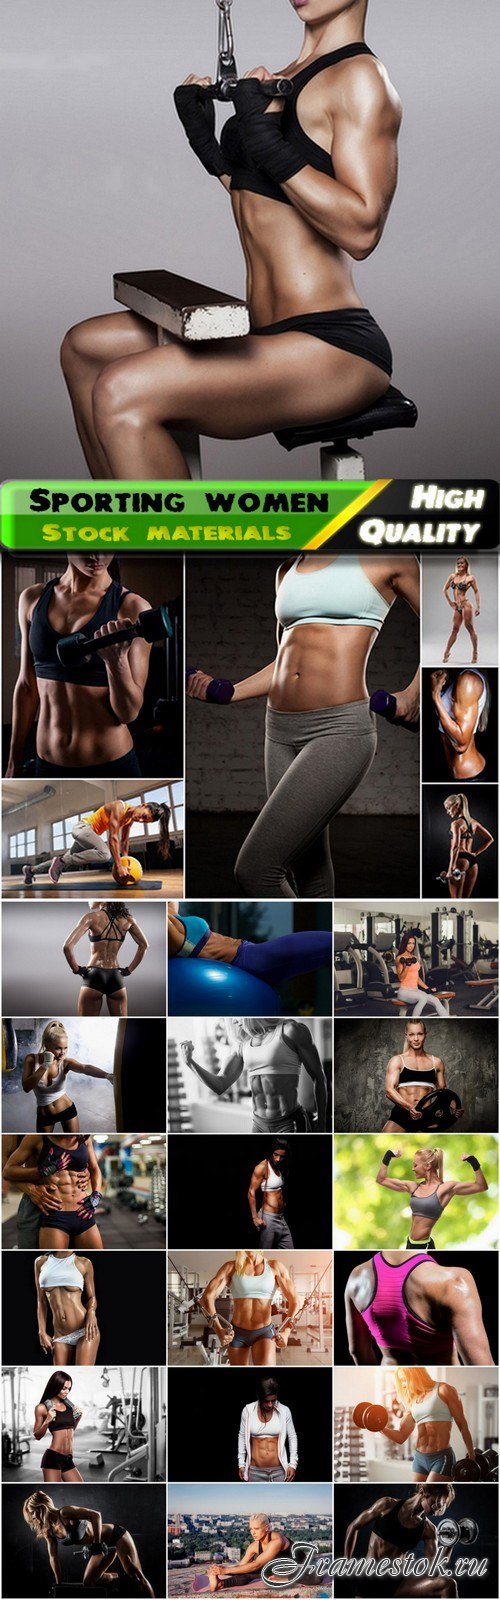 Sporting women with muscles in the gym - 25 HQ Jpg